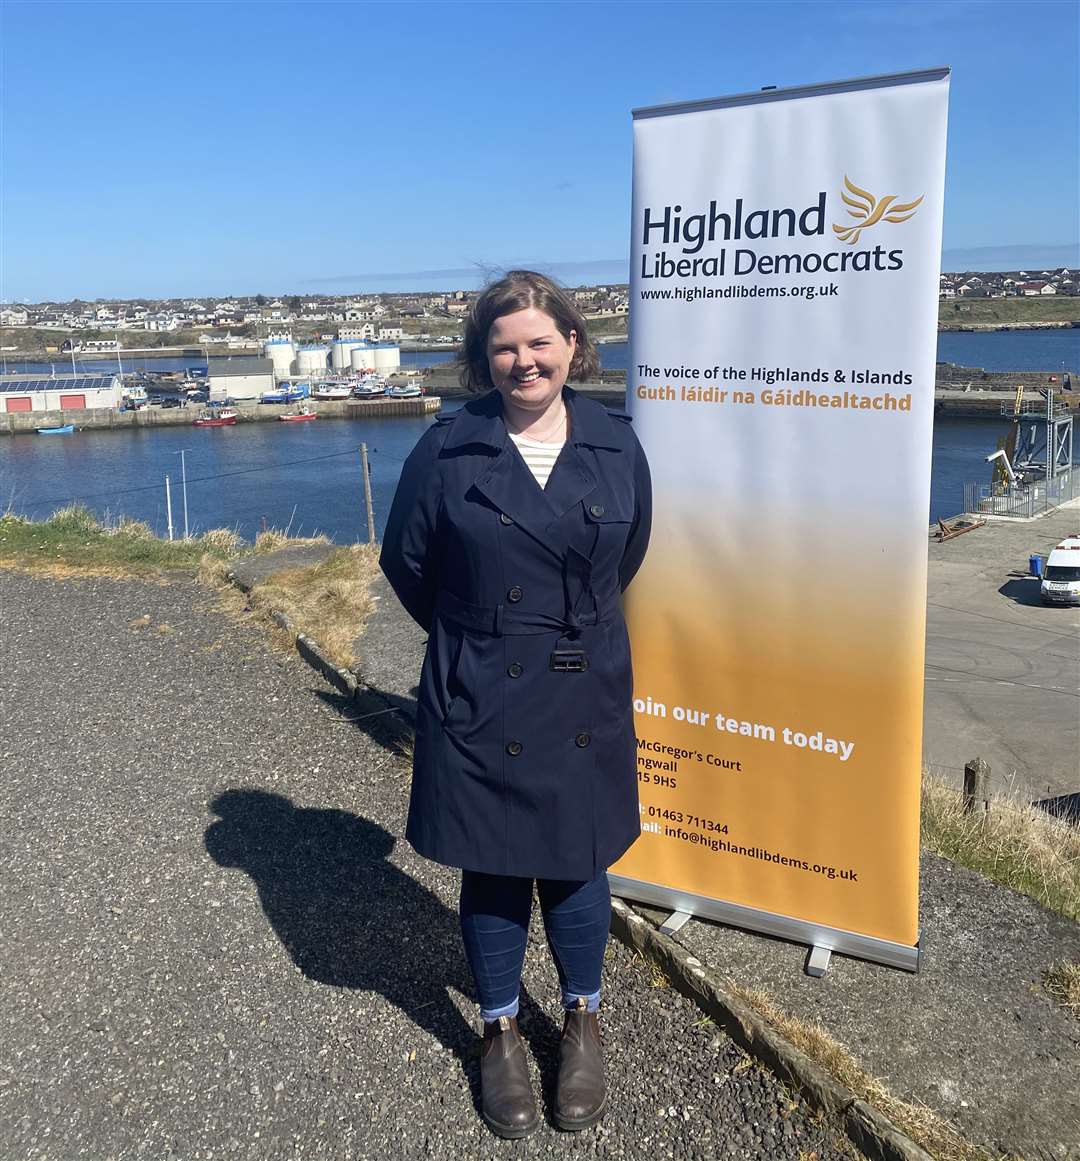 Molly Nolan campaigning in Wick. She says she would seek 'meaningful change' on a range of local issues and put recovery first.